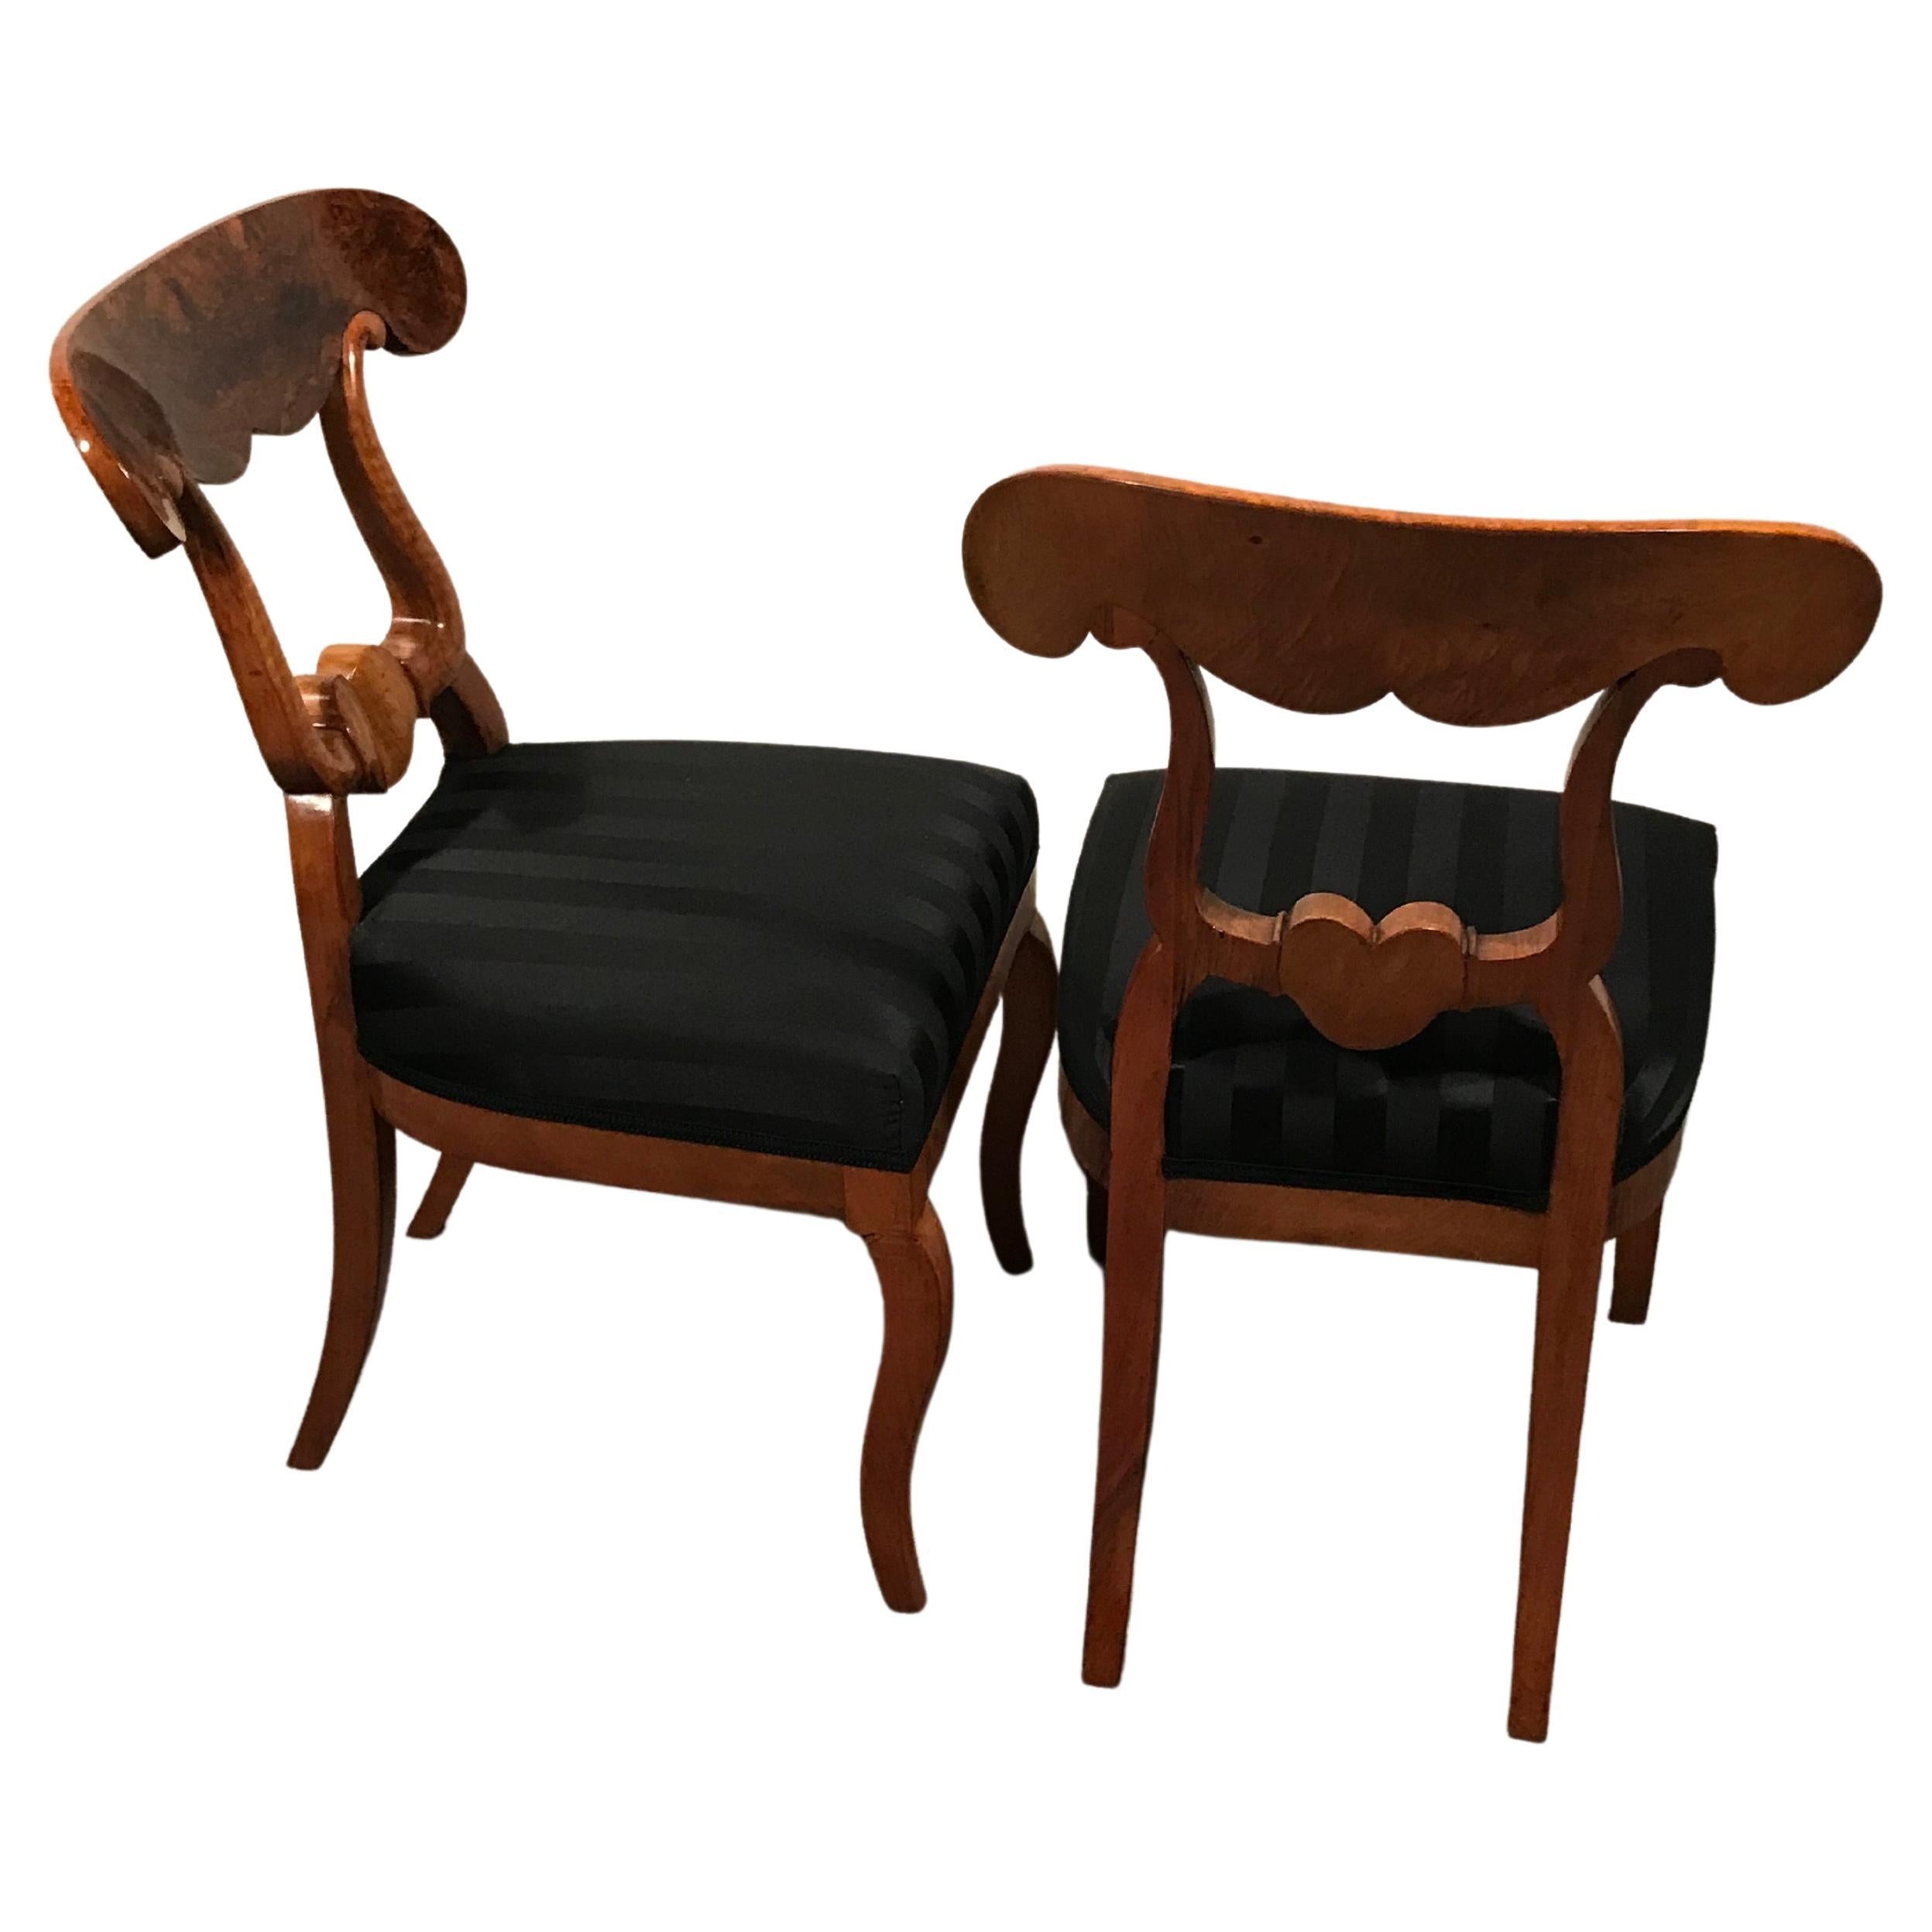 This exquisite set of 4 original Biedermeier chairs is a rare find. 
The so called original Biedermeier Ochsenkopf-Stuehle (ox-head chairs) get their name from their beautifully designed back. They date back to around 1820 and come from Southern